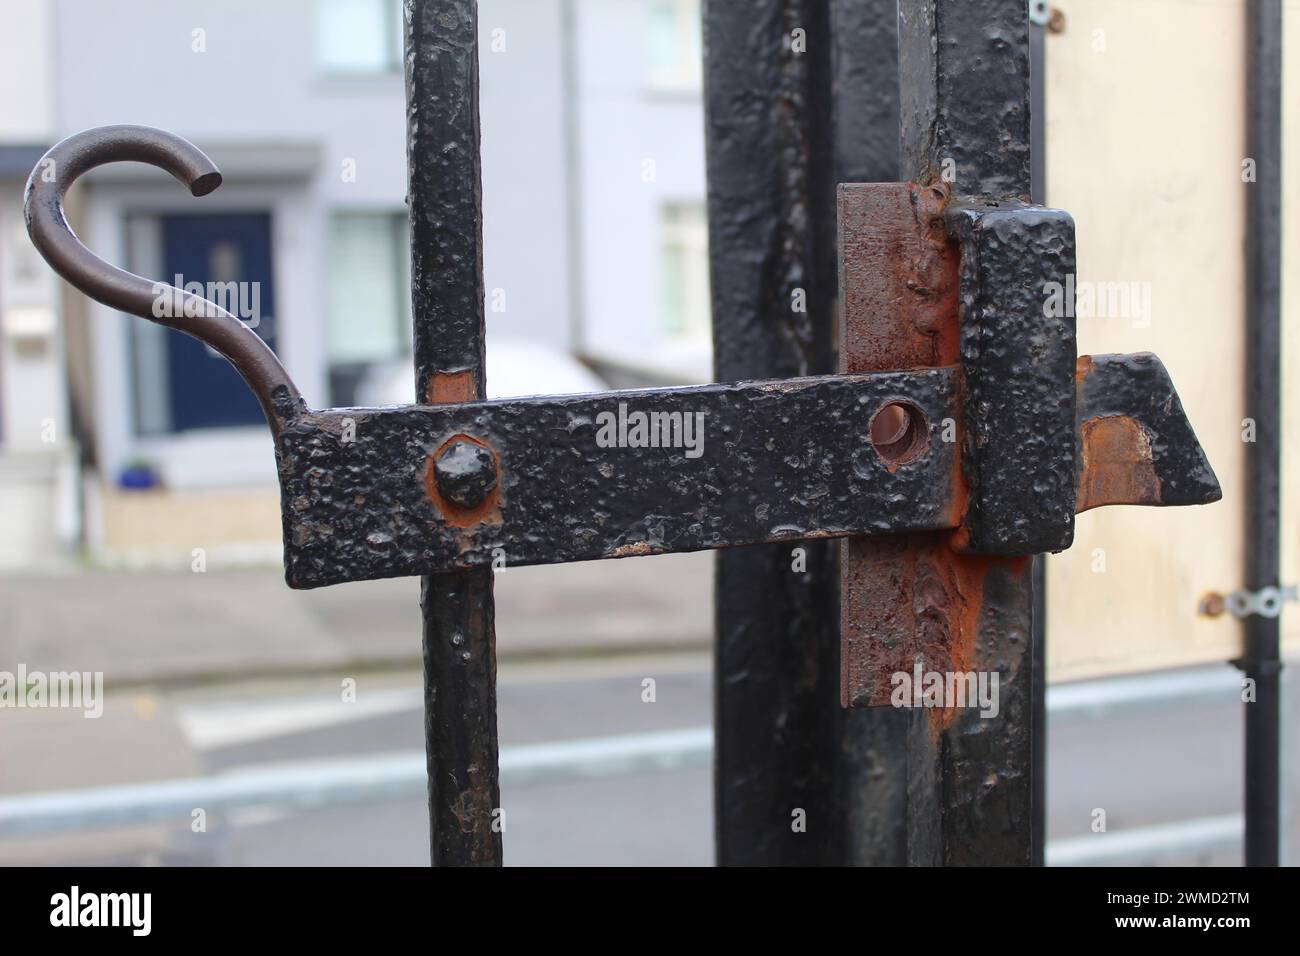 A close up photo of a black, antique and rusty gate lock beside a road. Stock Photo